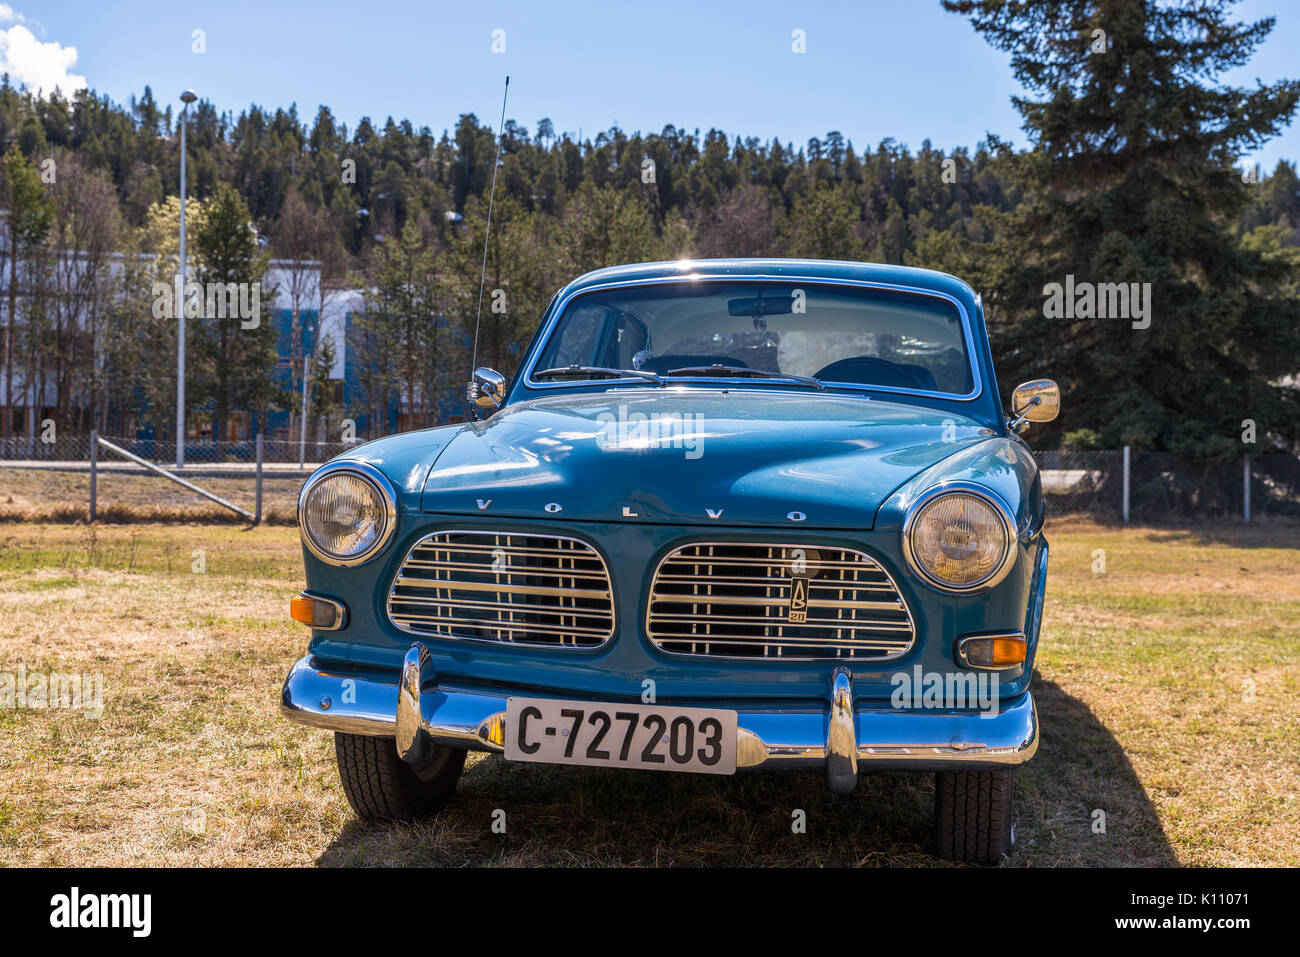 Blue, Volvo, old, classic, car, Stock Photo